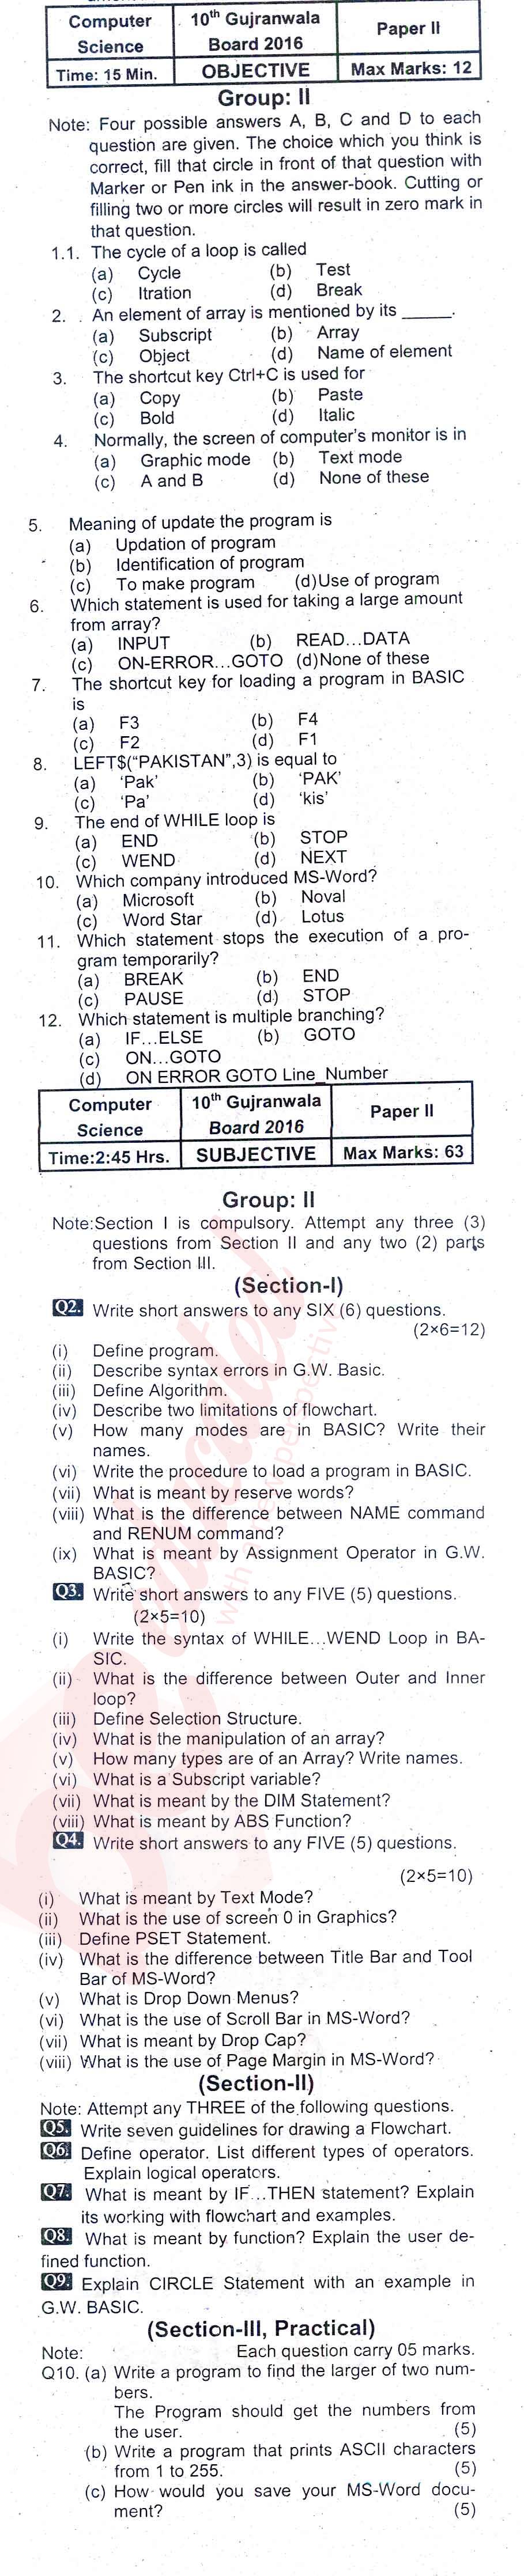 Computer Science 10th English Medium Past Paper Group 2 BISE Gujranwala 2016